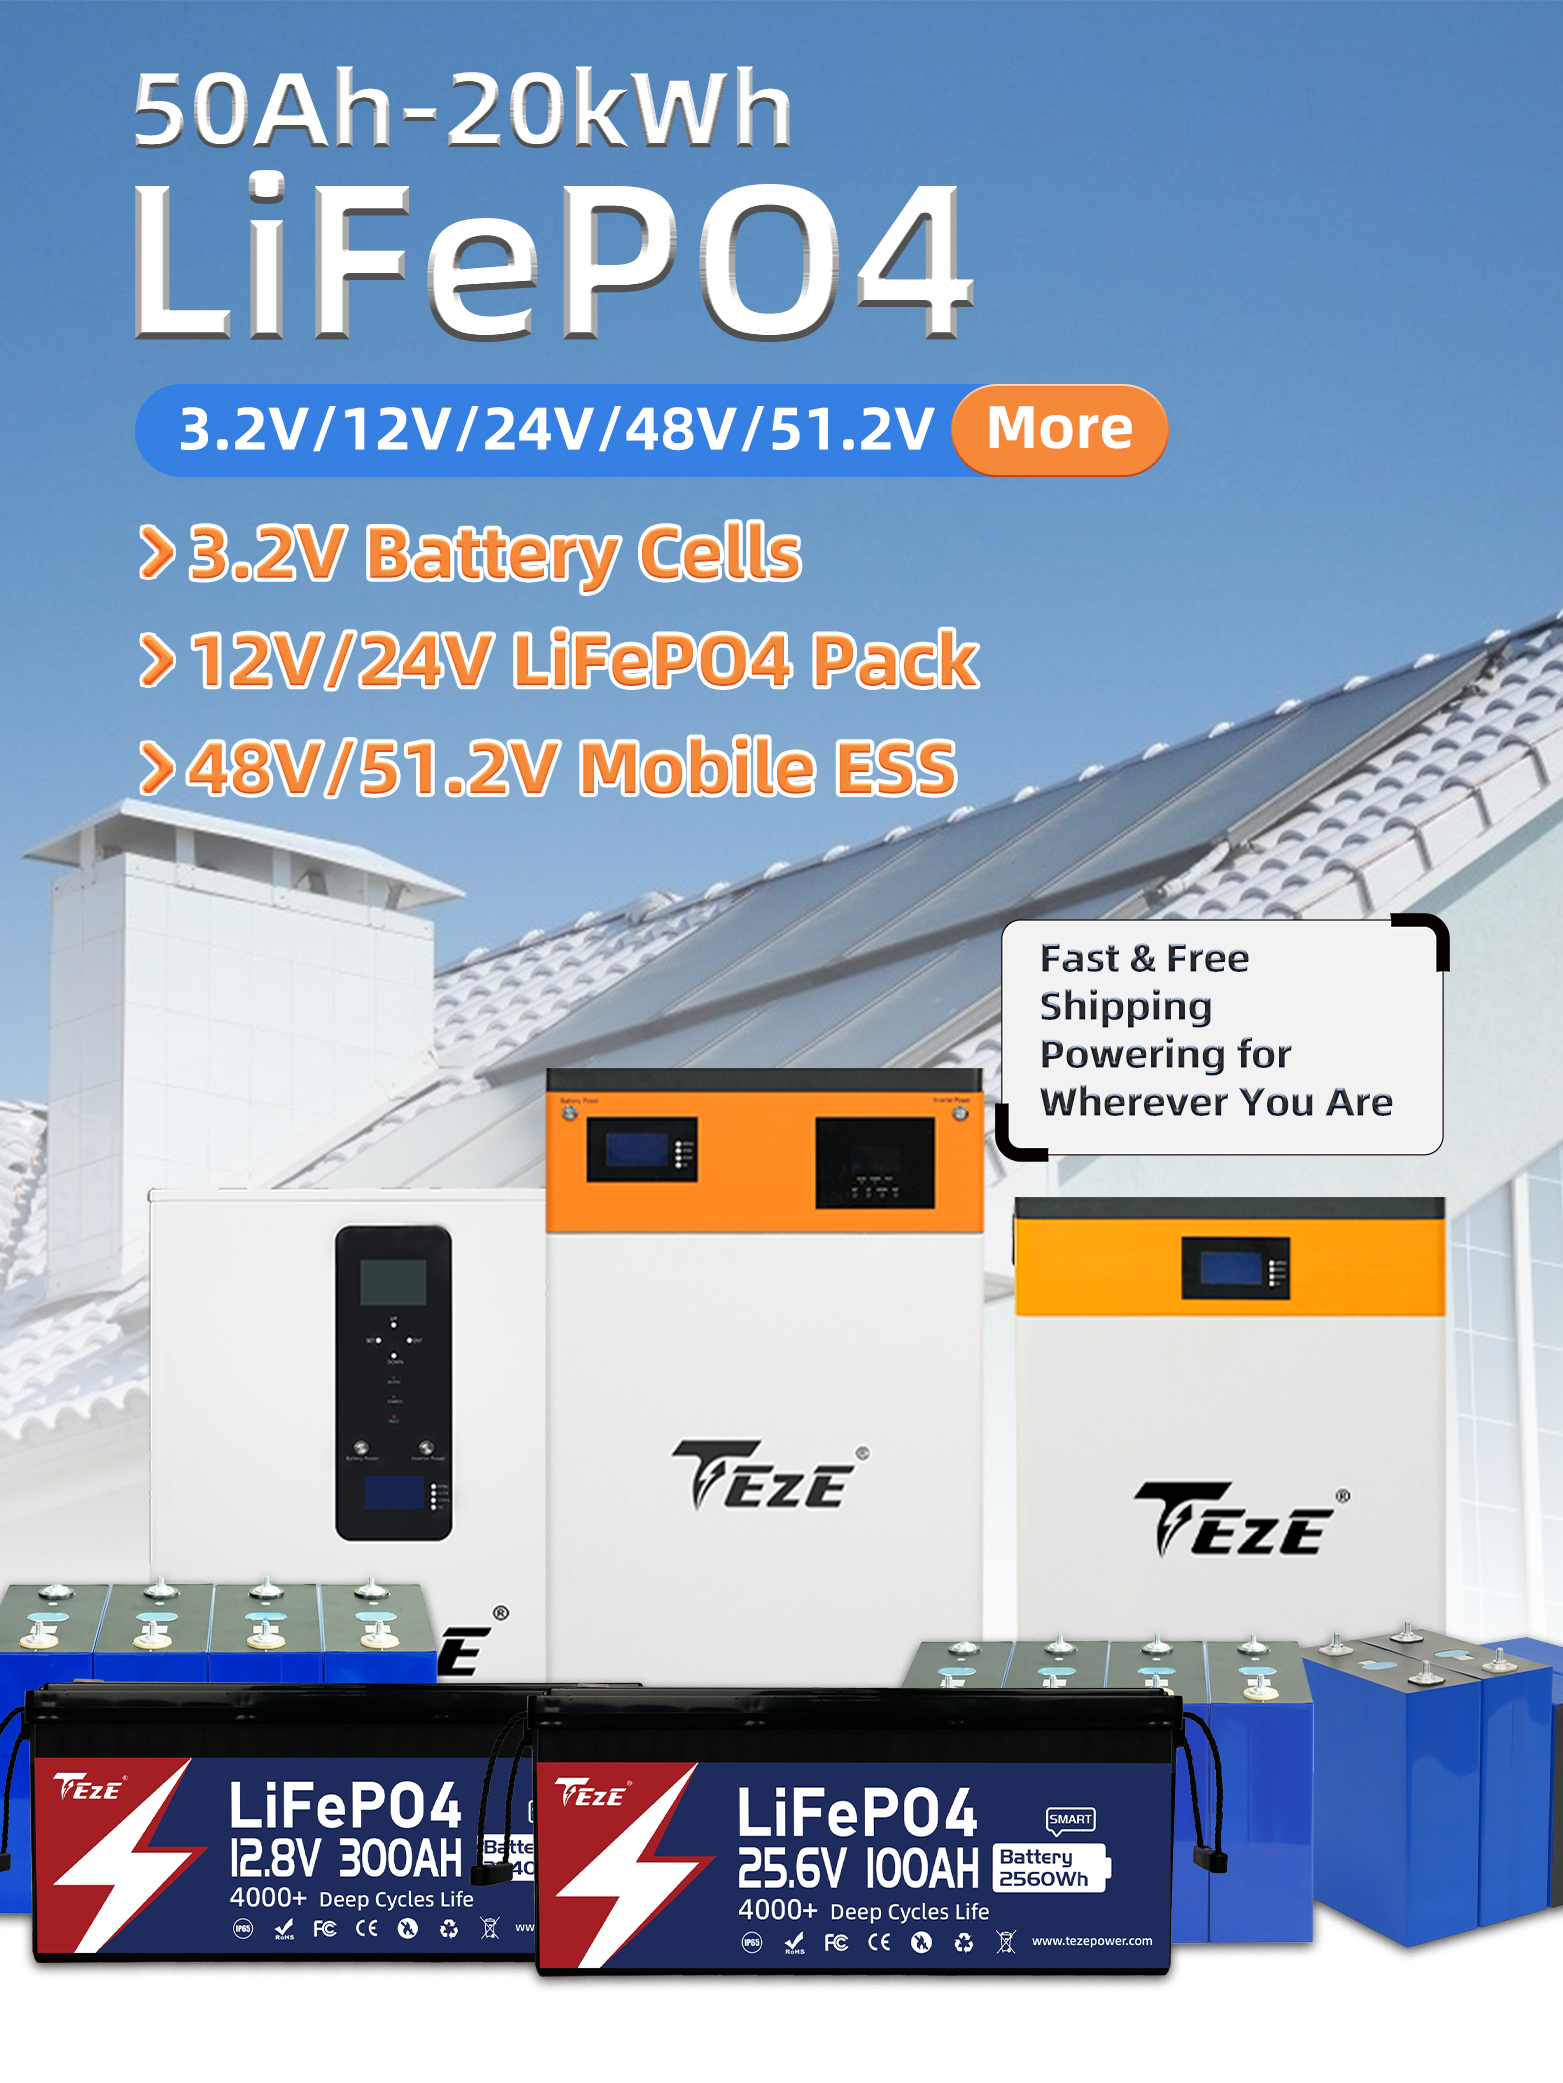 TezePower 12V 400Ah LiFePO4 Battery with Bluetooth, Self-heating and Active  Balancer, Built-in 250A Daly BMS(Bluetooth Built-in Version)